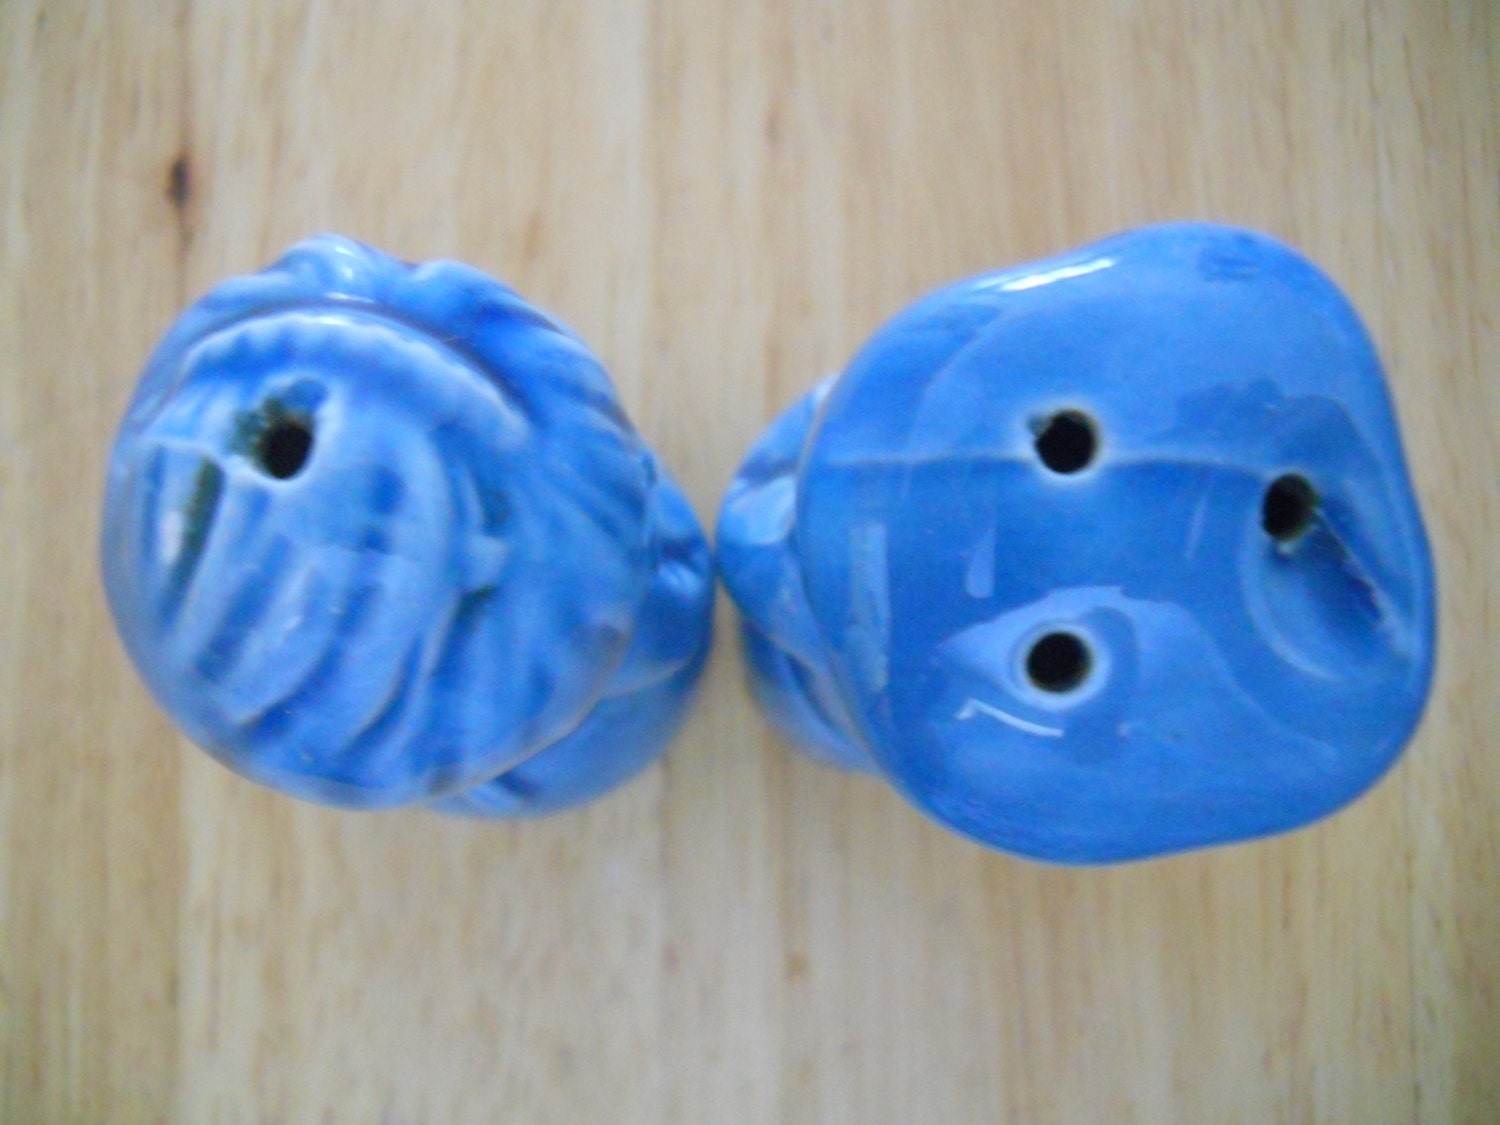 Blue Dutch Boy and Girl Salt and Pepper Shakers - vintage, collectible